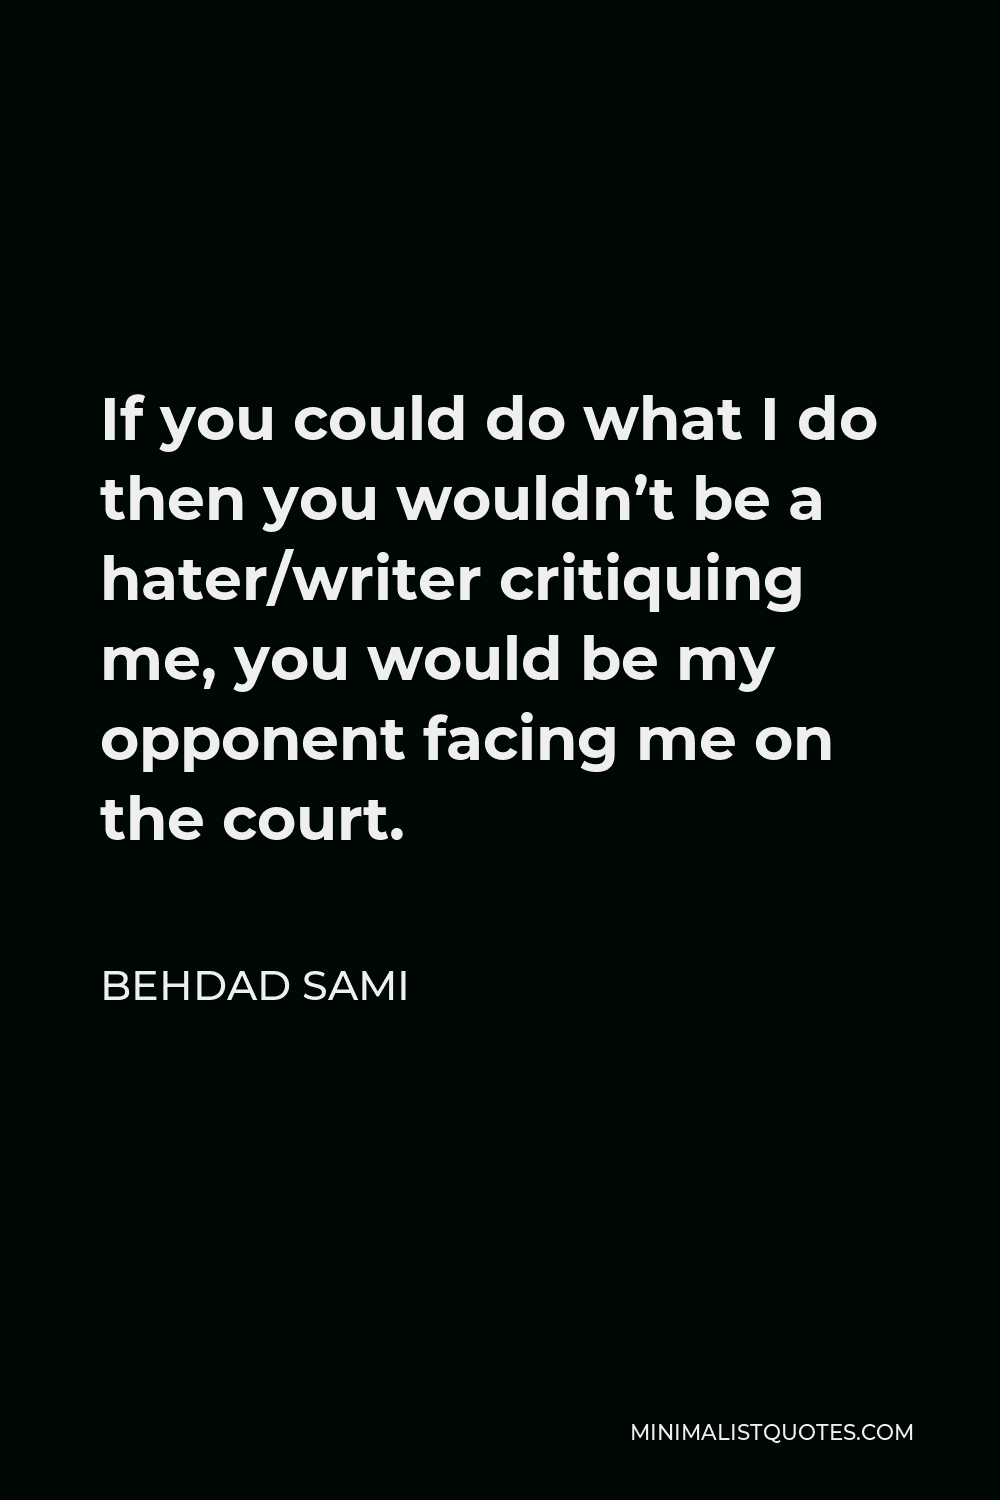 Behdad Sami Quote - If you could do what I do then you wouldn’t be a hater/writer critiquing me, you would be my opponent facing me on the court.